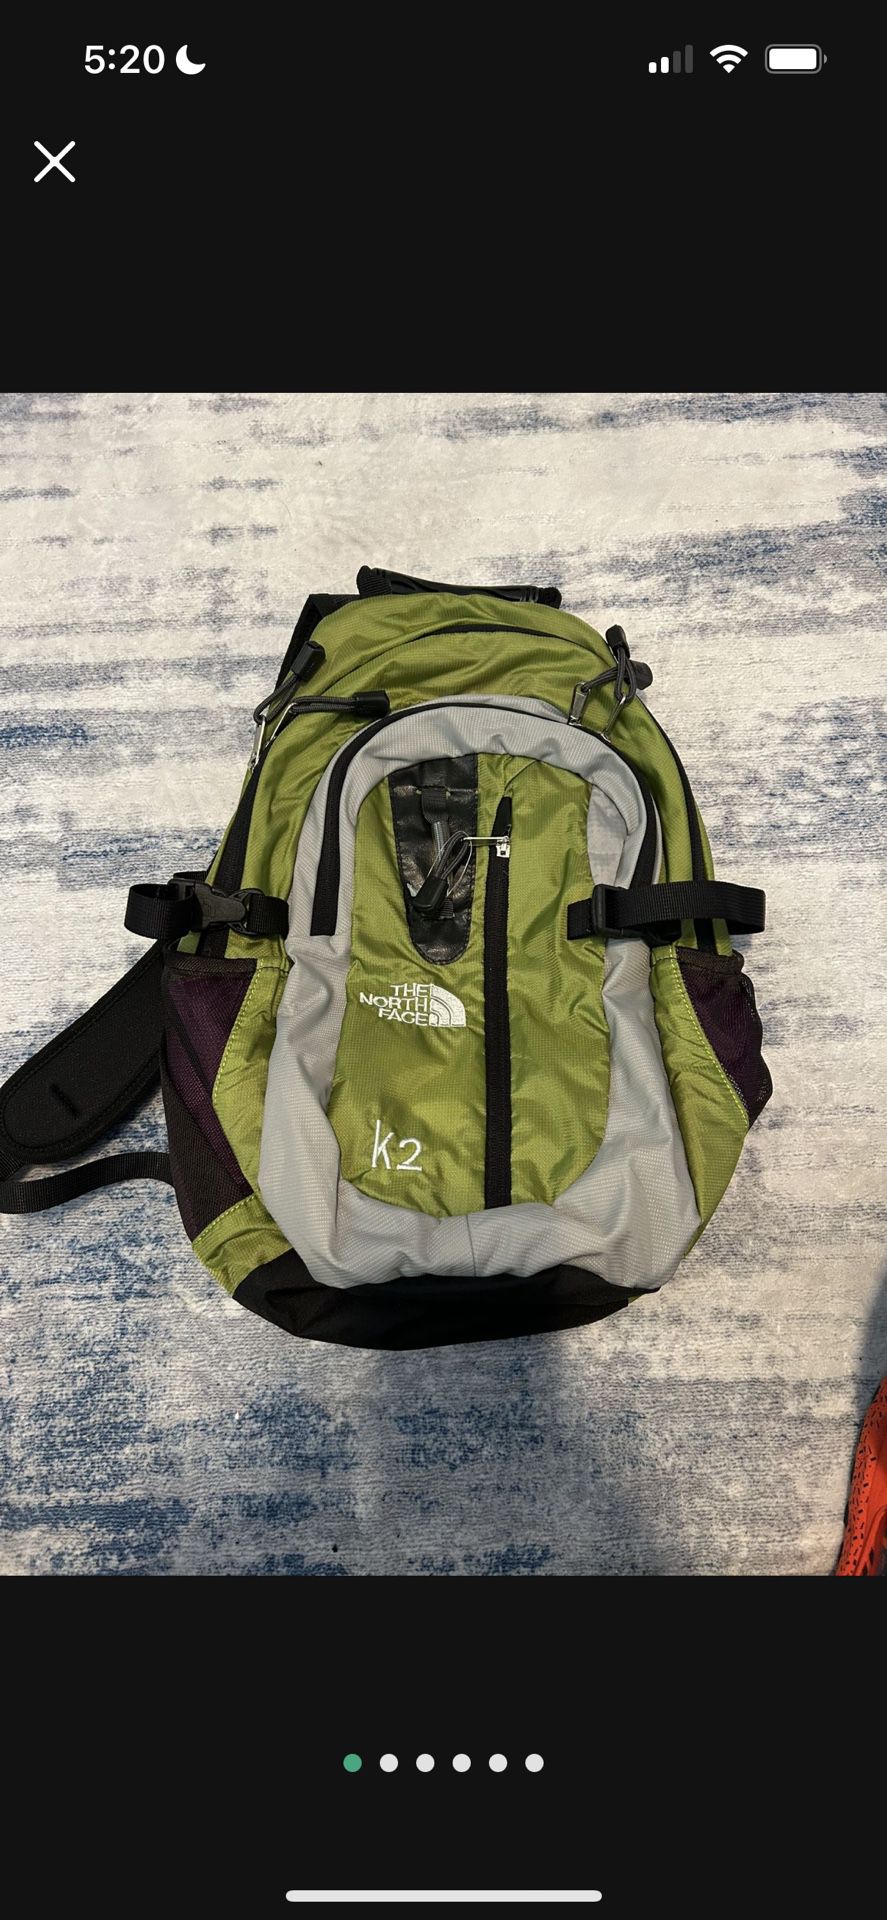 The North Face Mini K2 Backpack 